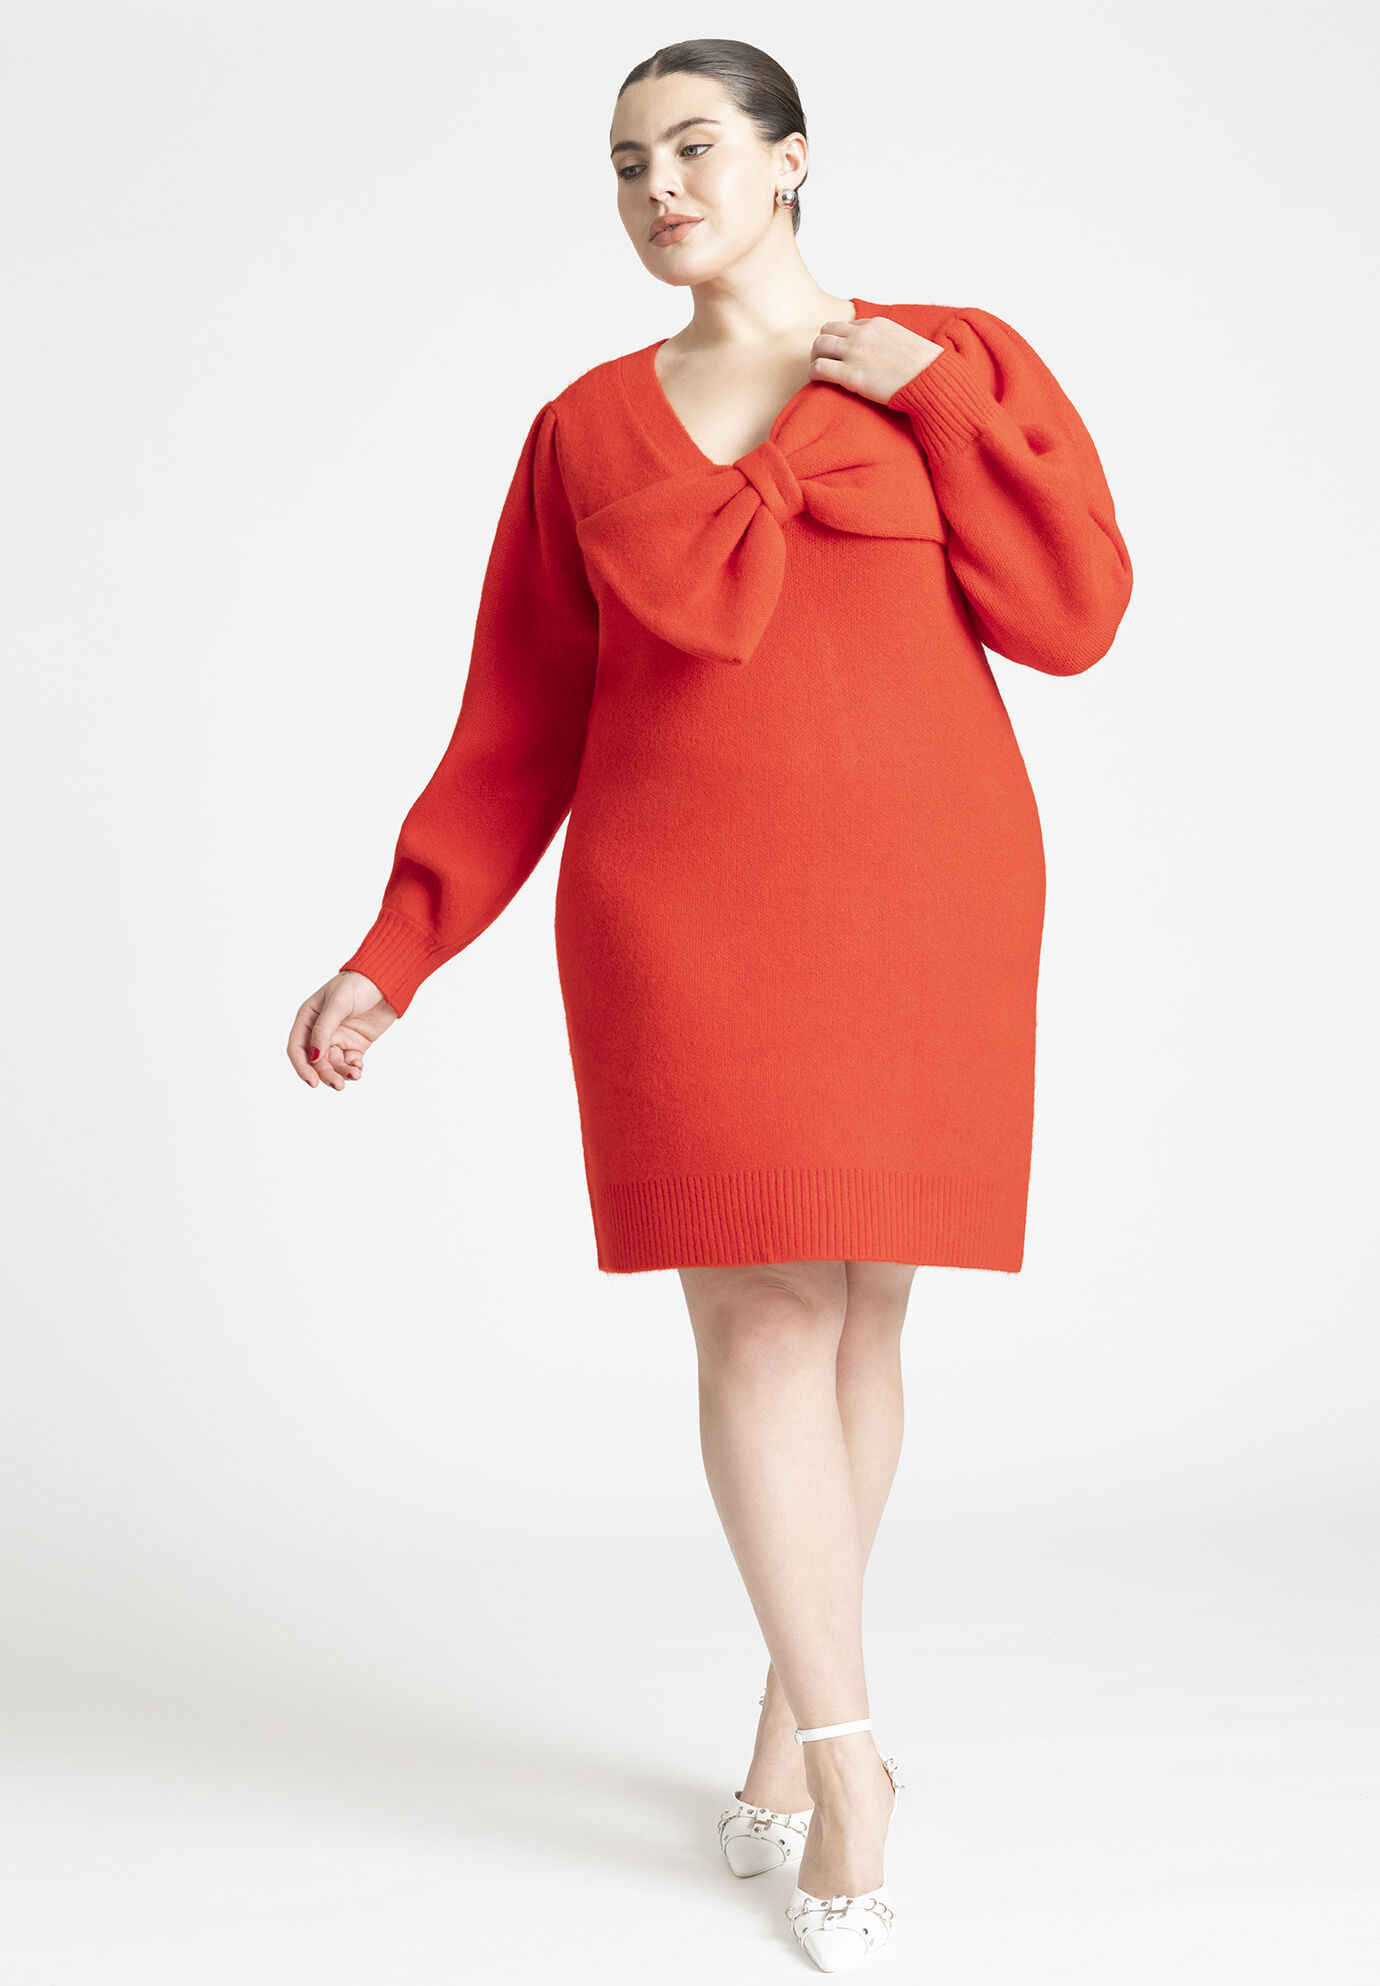 Plus Size Sweater Above the Knee Short Dress With a Bow(s)